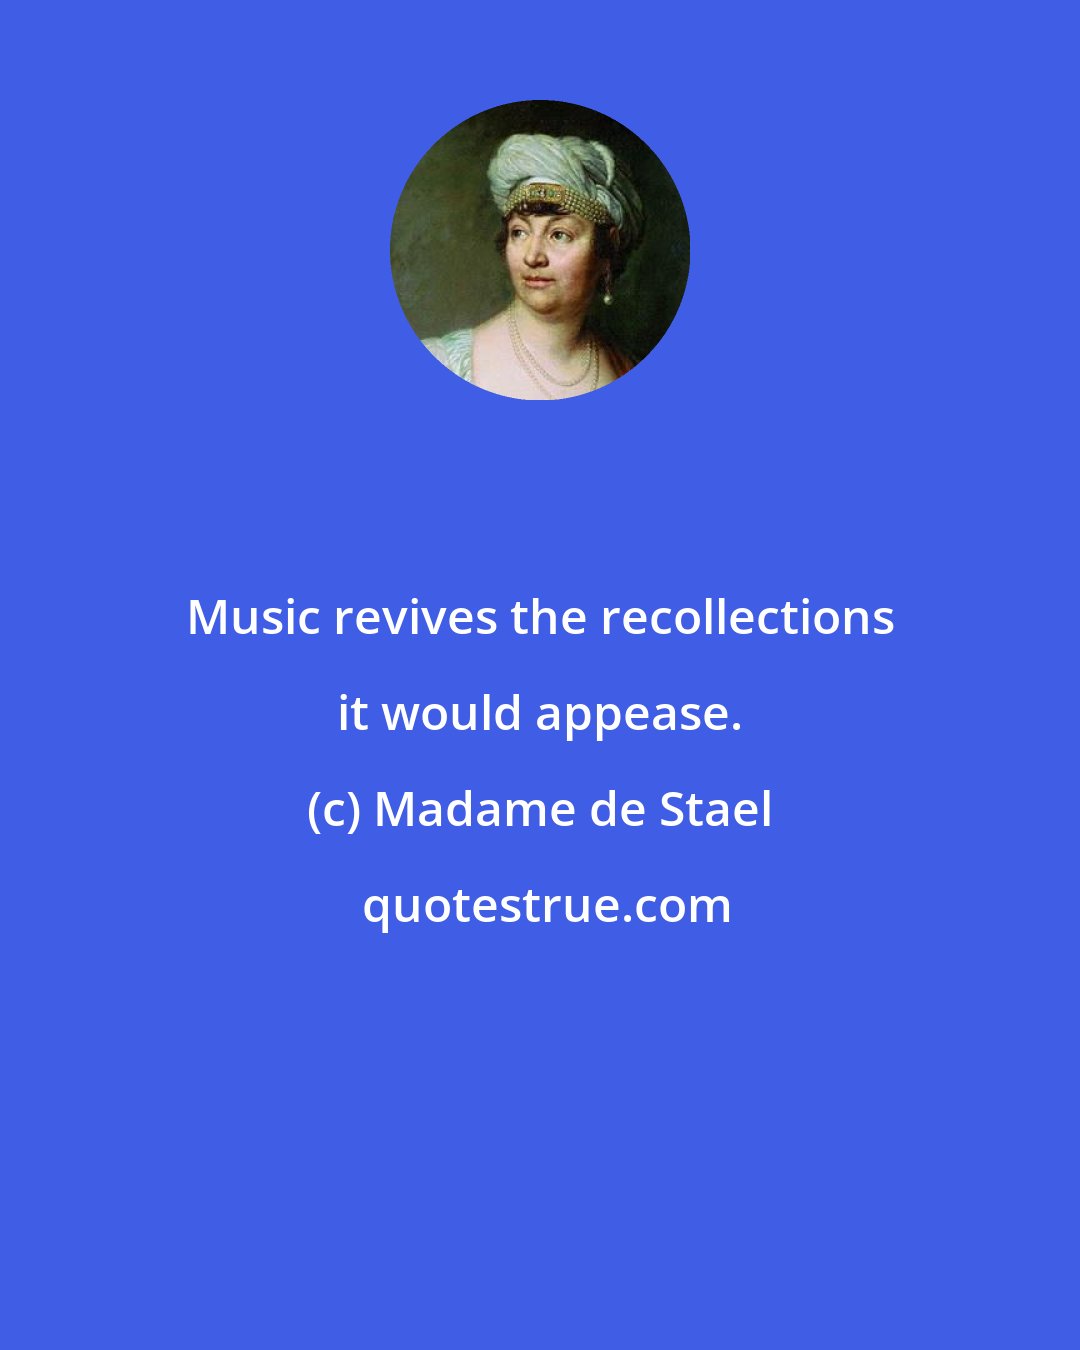 Madame de Stael: Music revives the recollections it would appease.